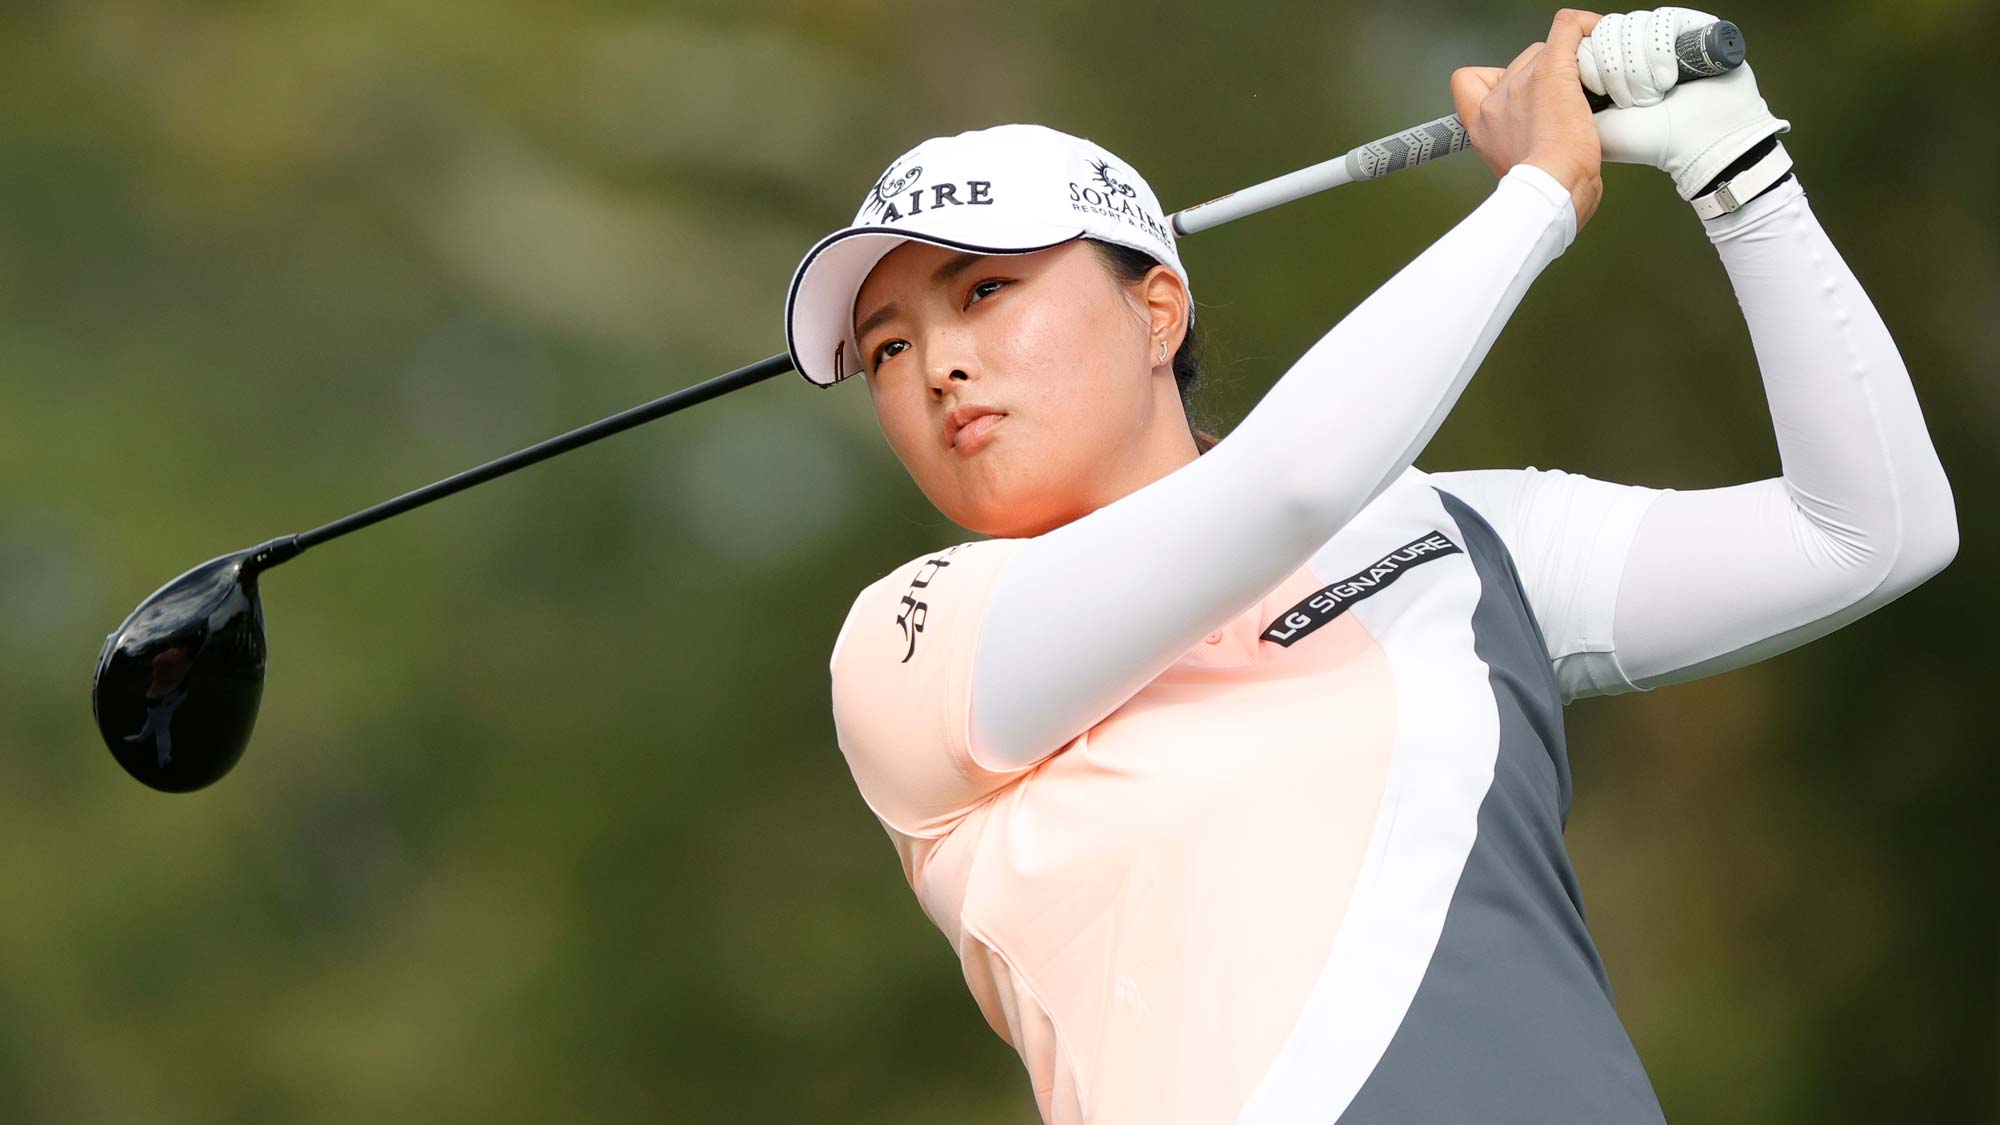 Jin Young Ko of Korea hits her tee shot on the 11th hole during the second round of the Cognizant Founders Cup